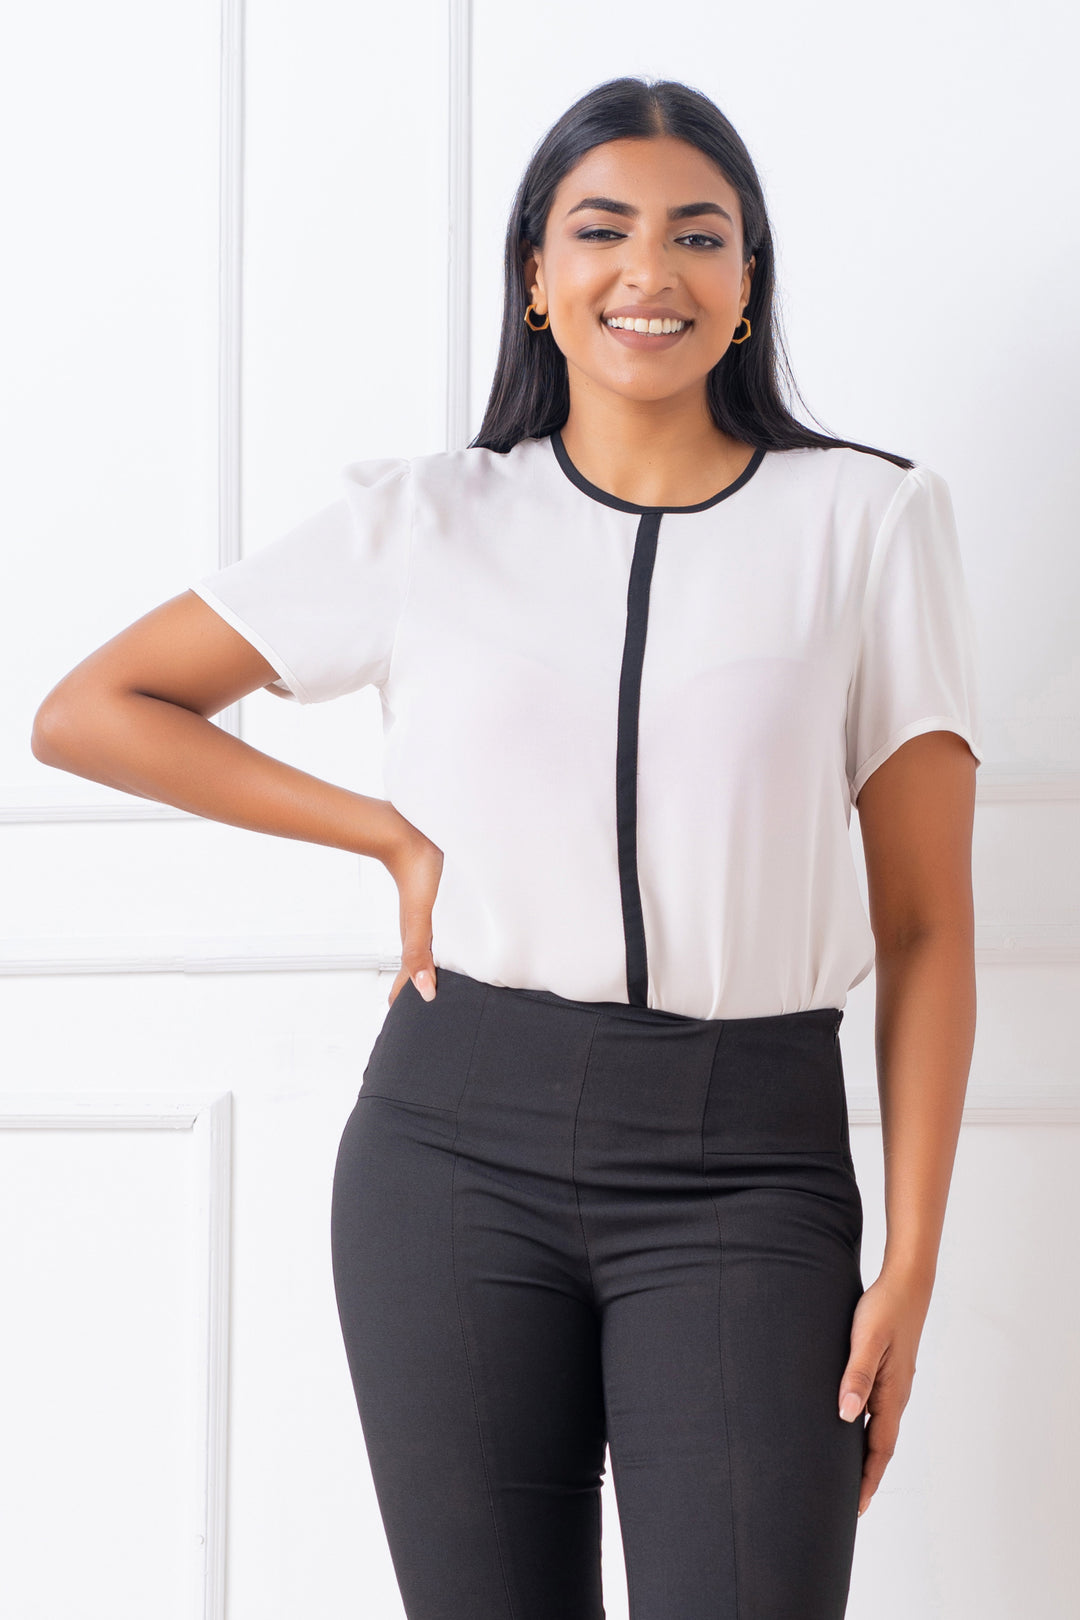 Black & White Contrast Pipping Top - Regular Fit, Top, High Neck, New Arrivals, Office Tops, Regular Fit, Short Sleeves, Smart Casual, Smart Casual Top, Work Top, workwear - MONDY, Sri Lankan